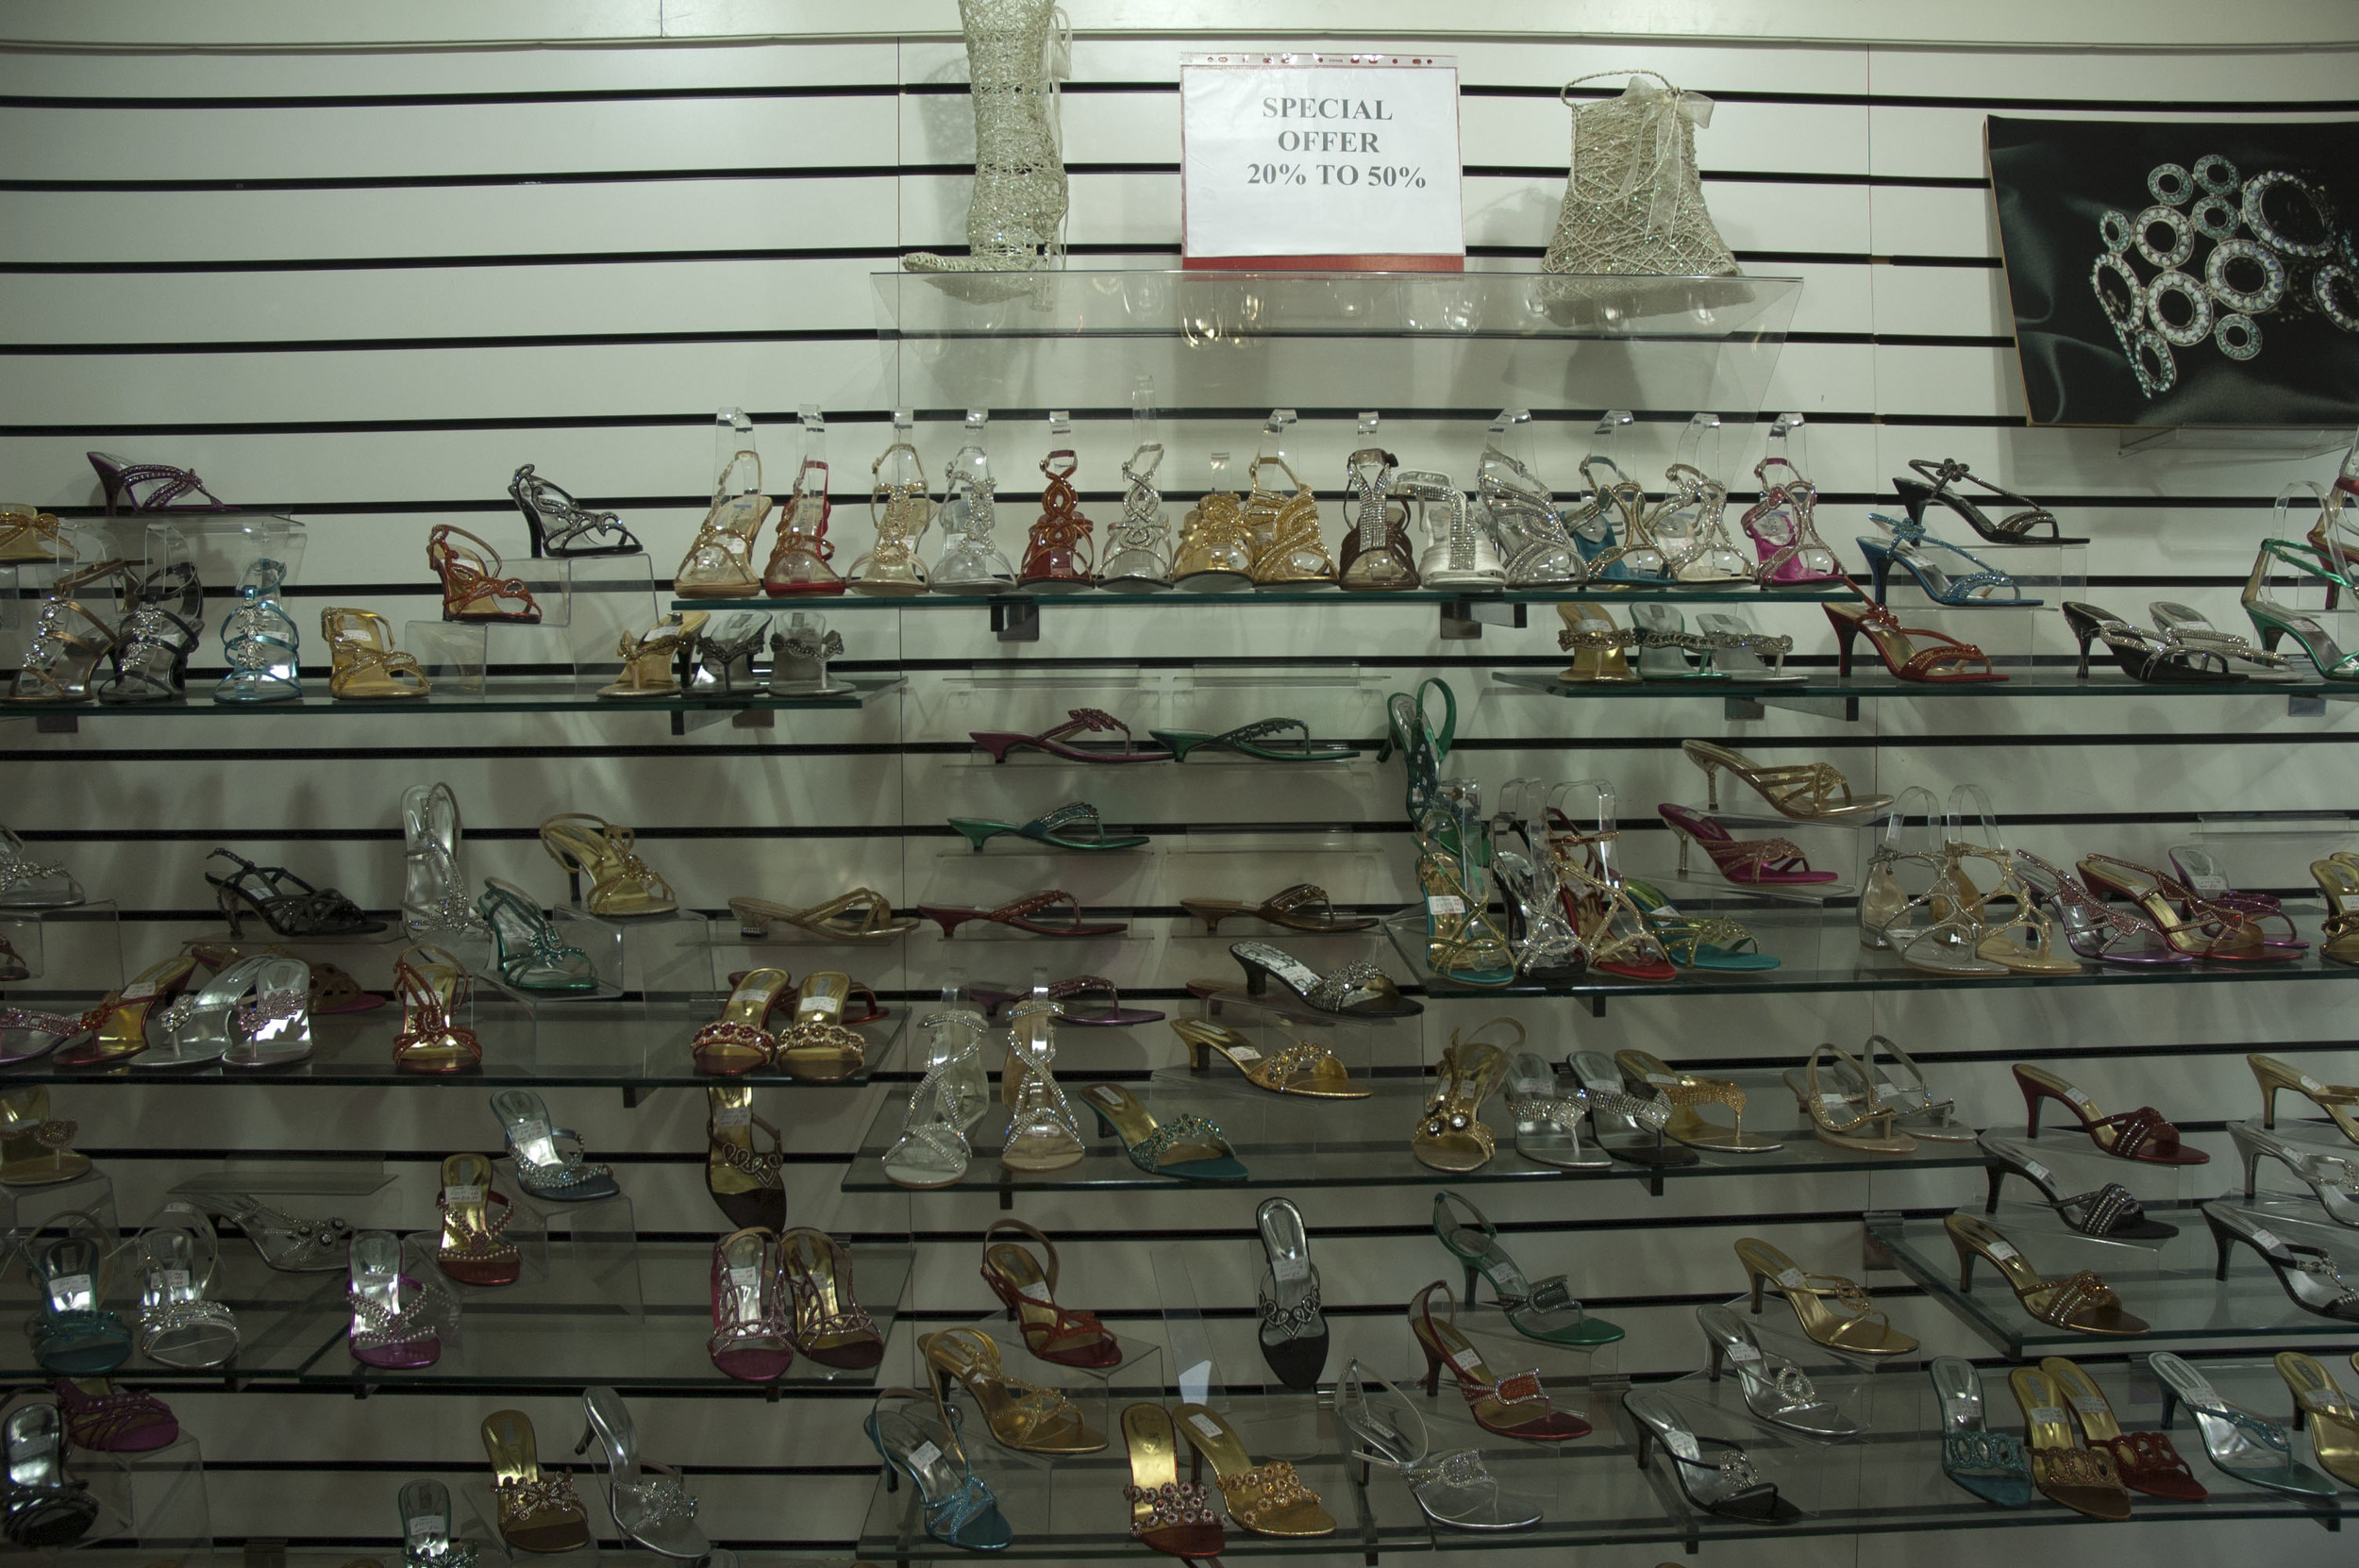 Floating shoes 5 of 7.JPG